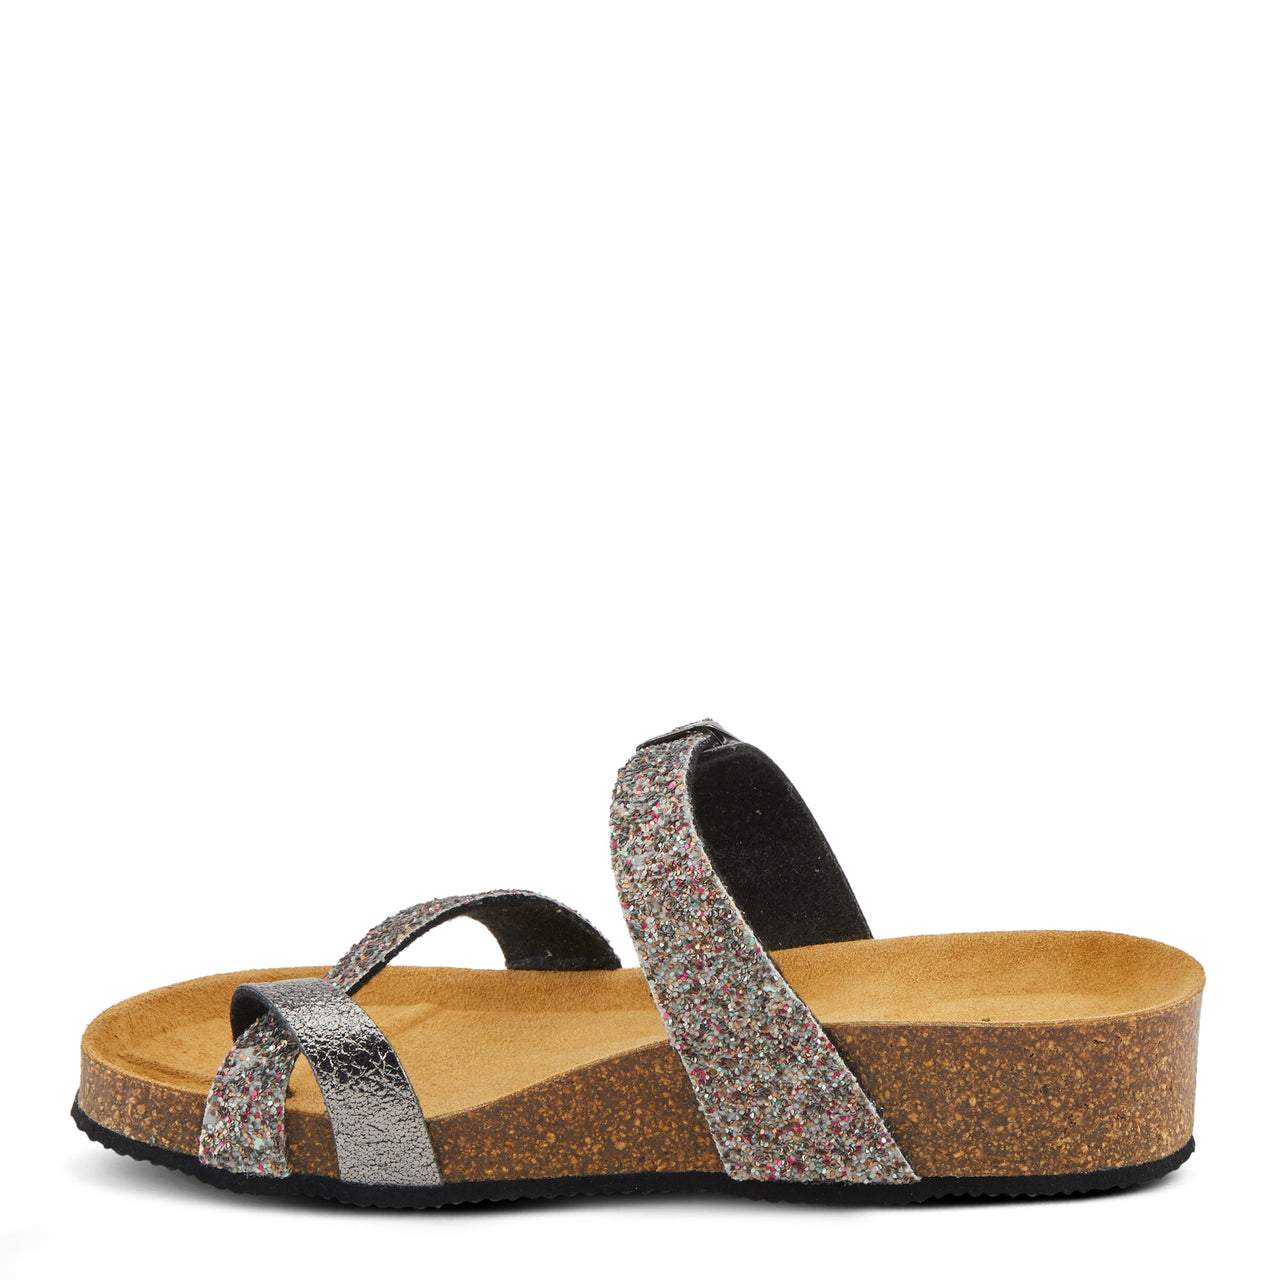 Spring Step Burch Sandals in metallic silver leather with cushioned footbed and slip-on design